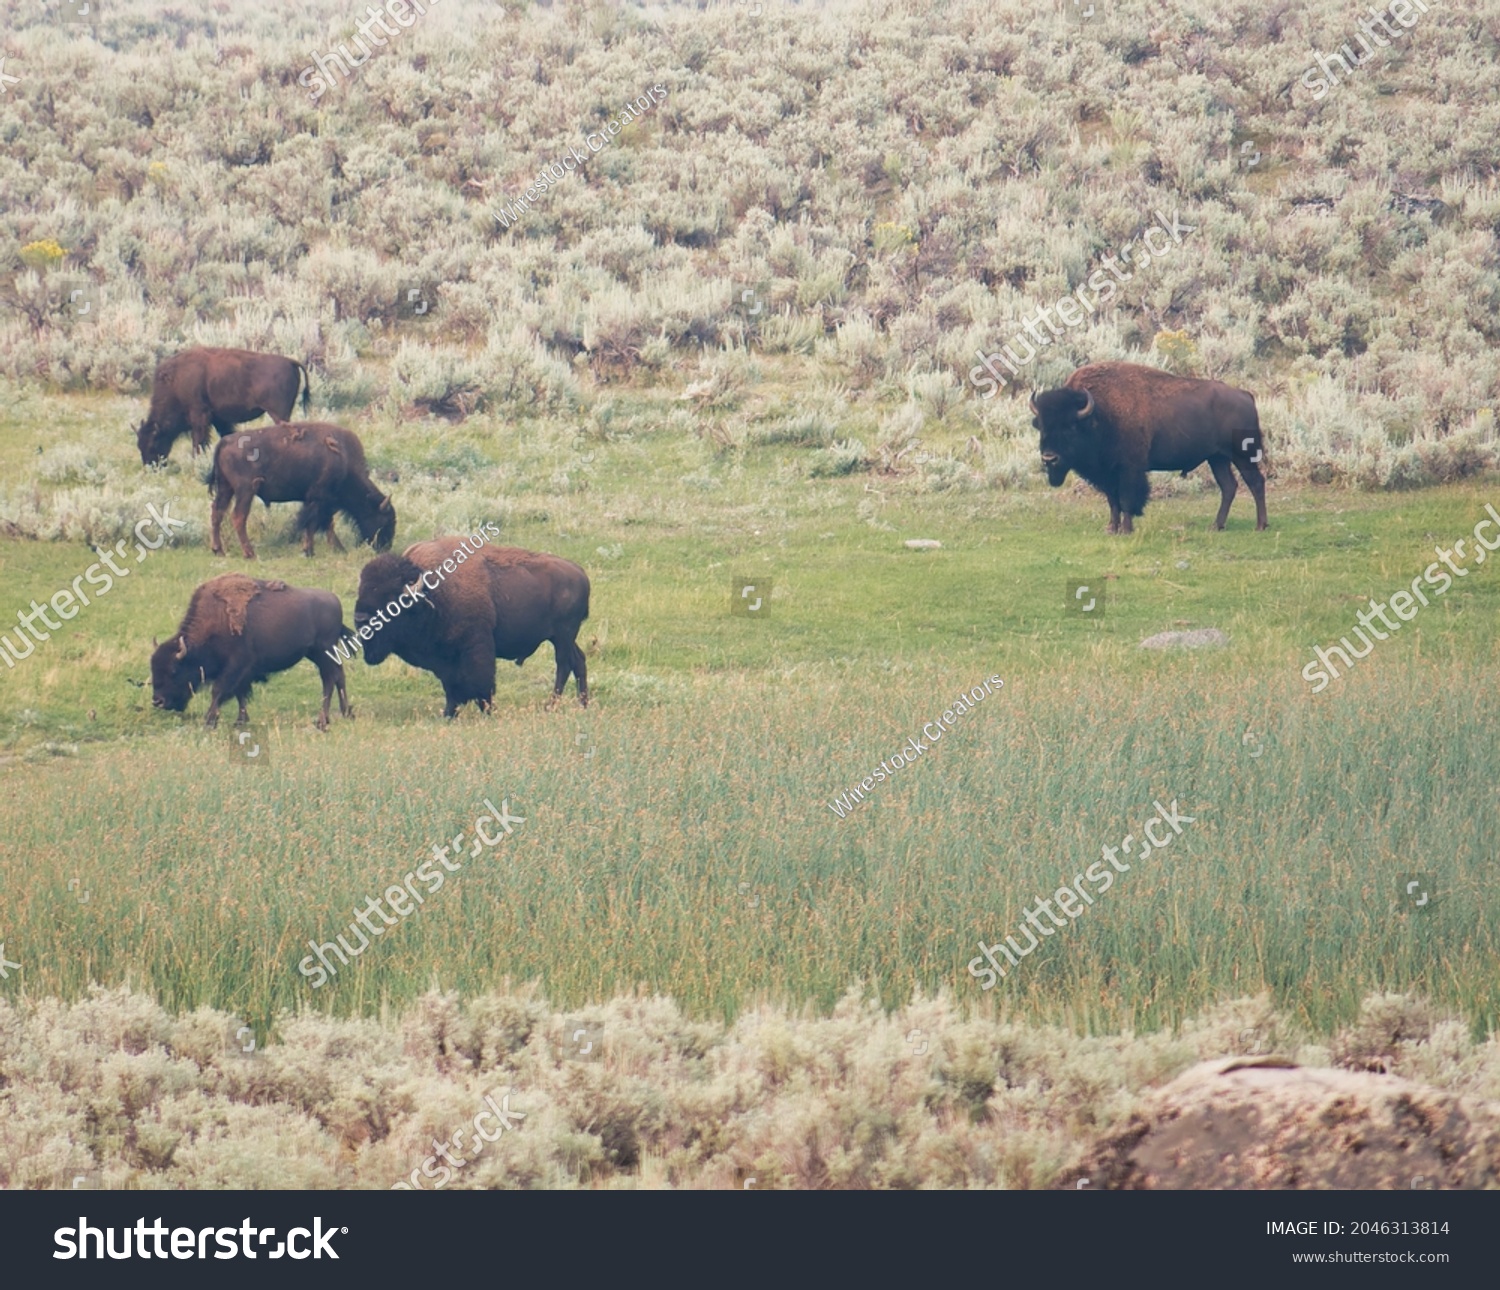 A group of bisons grazing in the field #2046313814